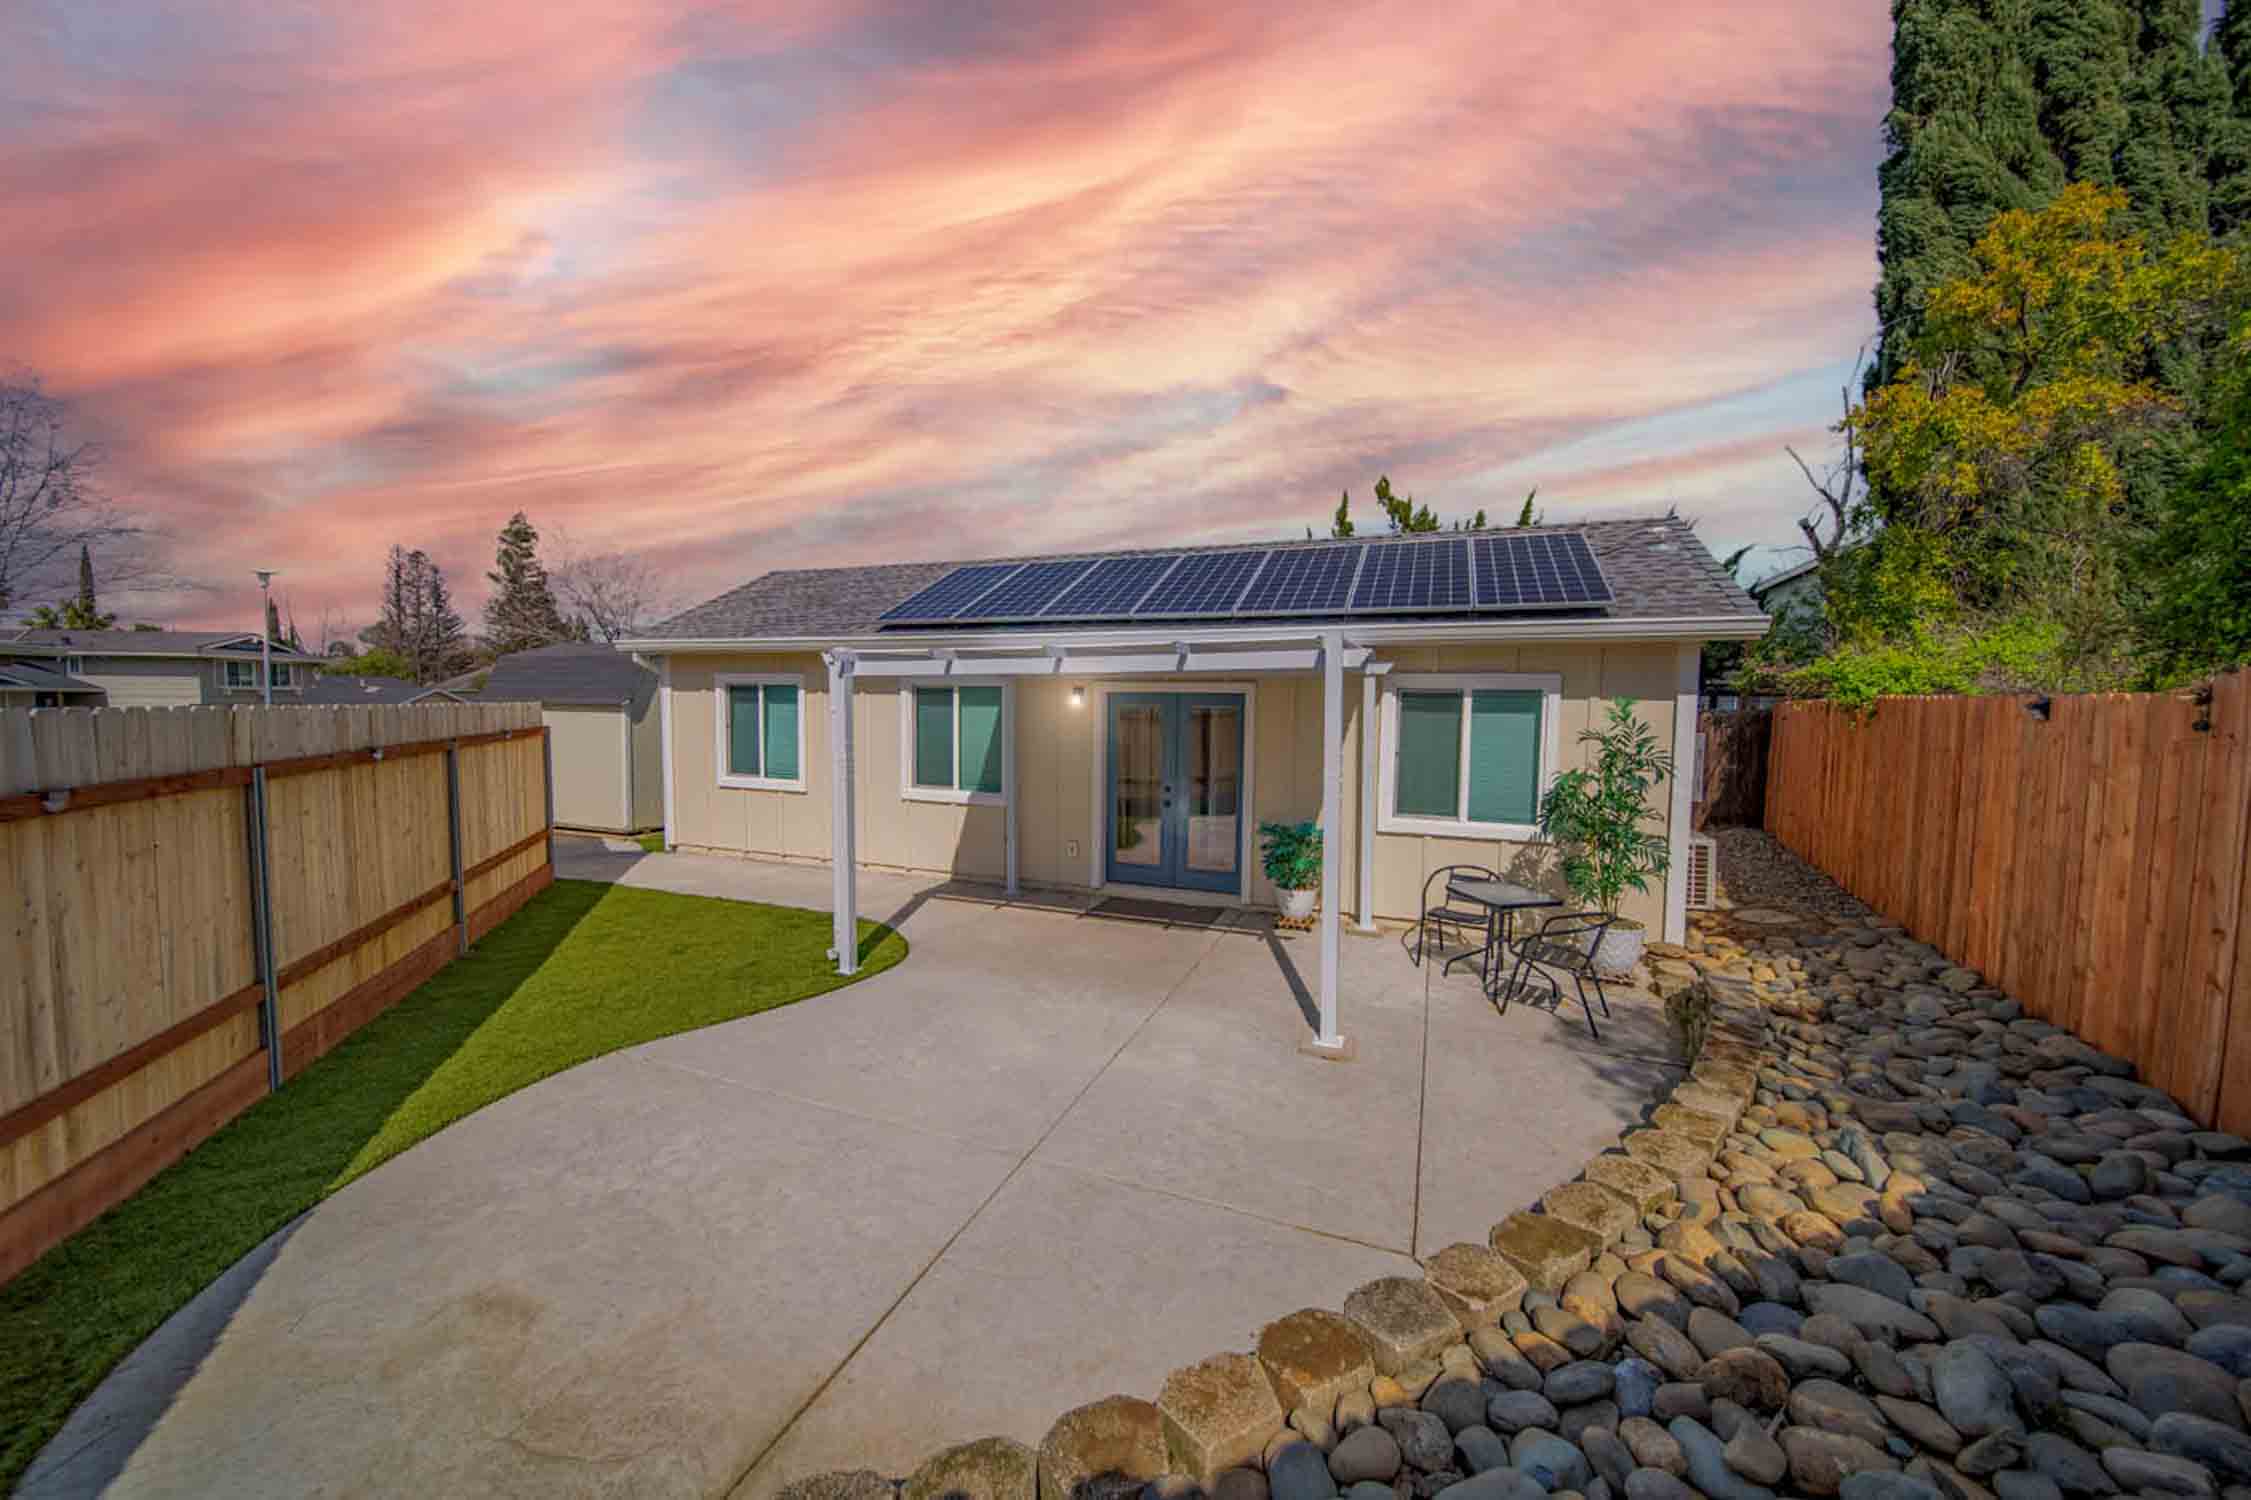 An ADU home with solar panels on the roof provided by top our top ADU builder in San Jose.